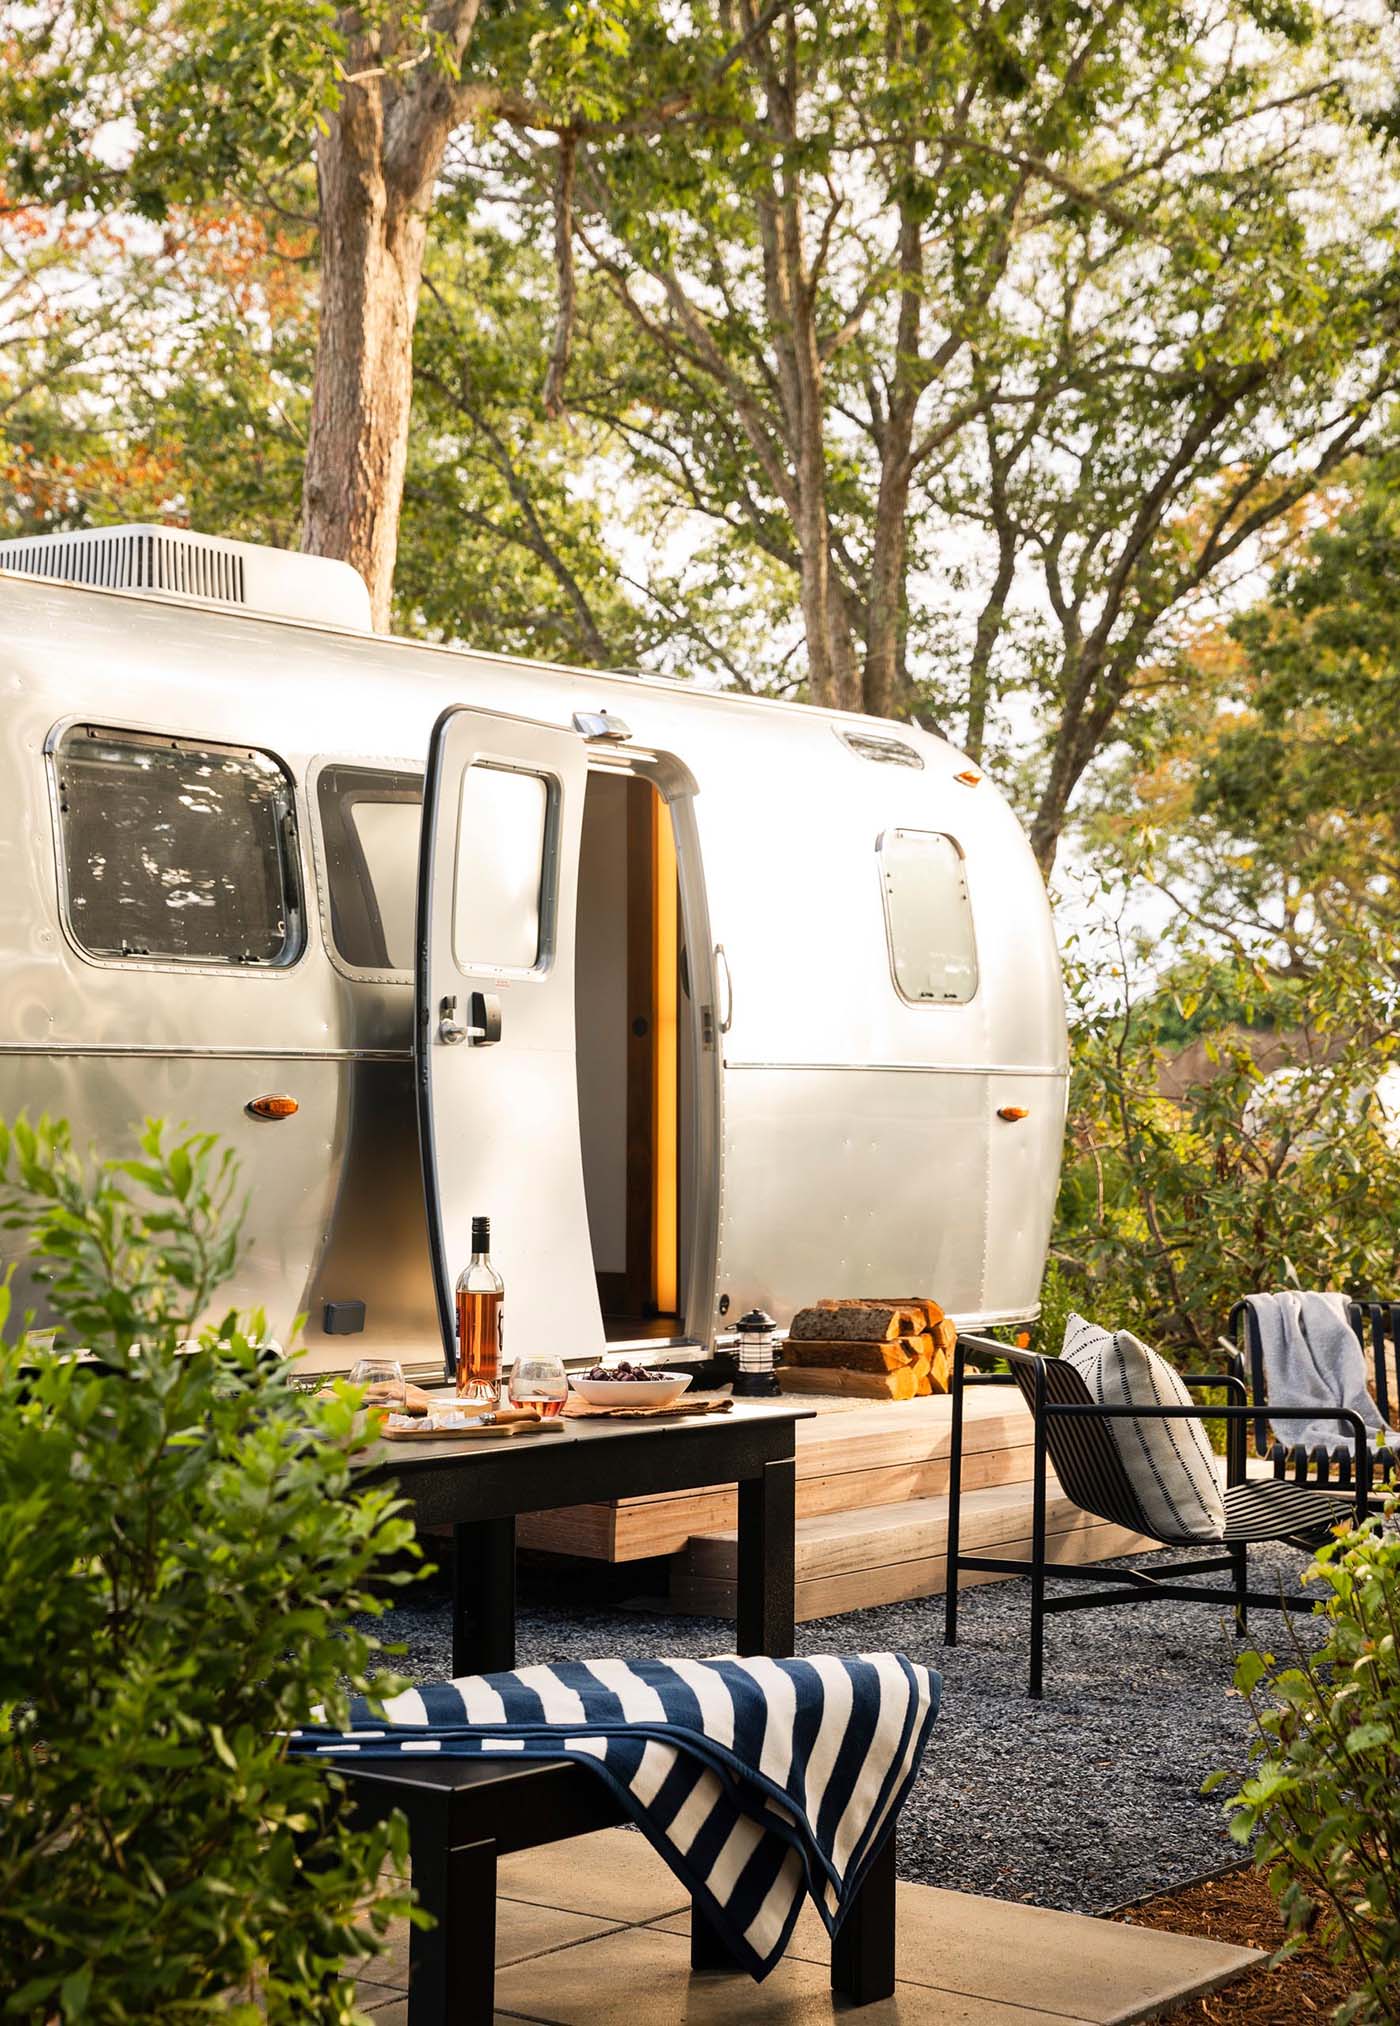 A remodeled Airstream trailer with a dedicated space for outdoor dining, and a small fire pit with a couple of chairs.